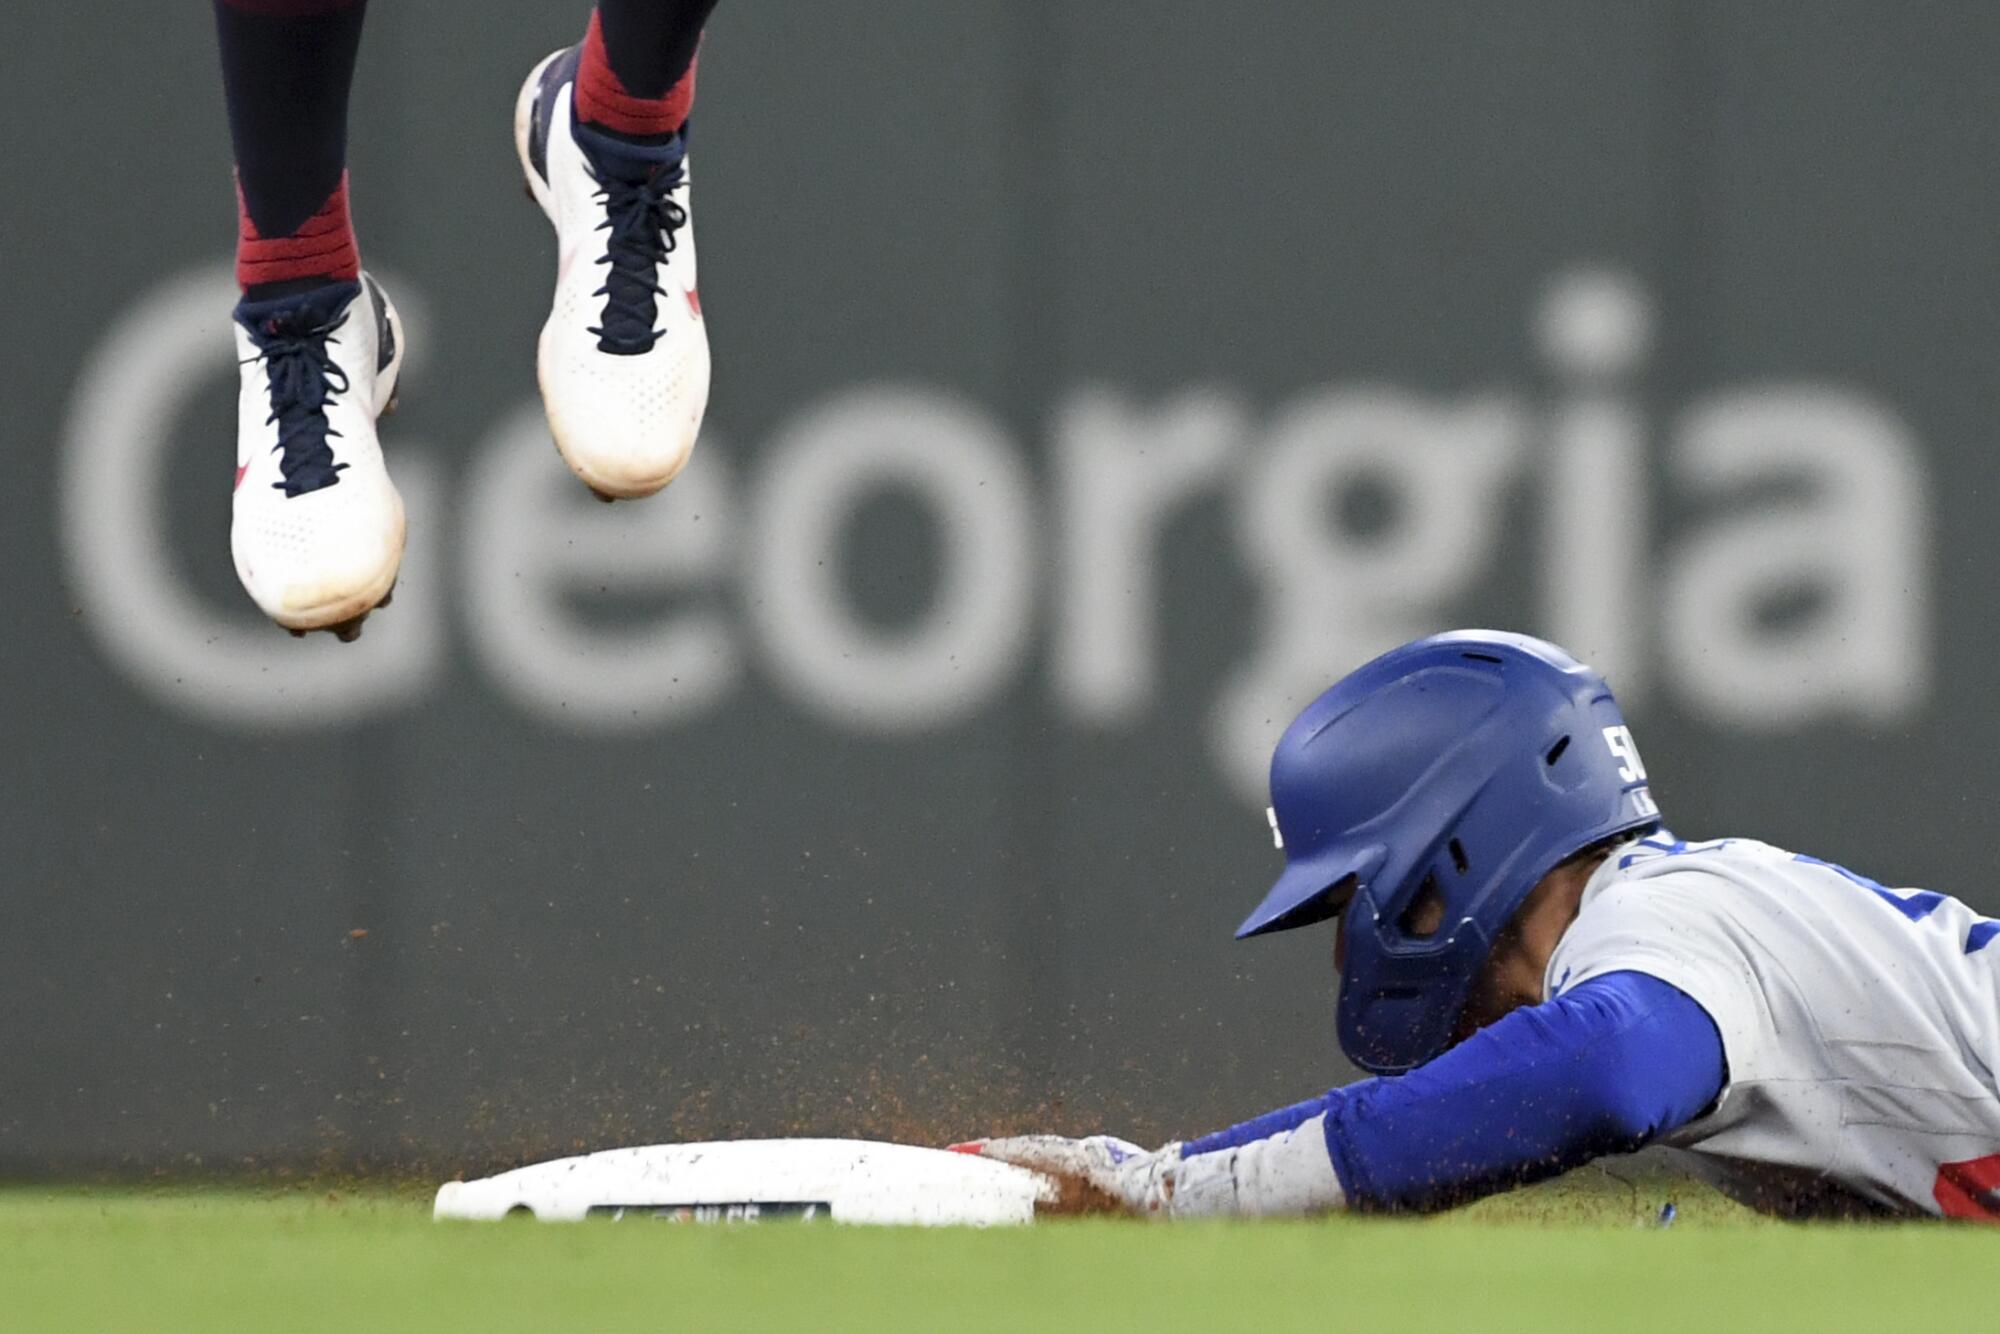 Dodgers' Mookie Betts, right, dives to steal second base as Braves shortstop Dansby Swanson jumps to catch a pass